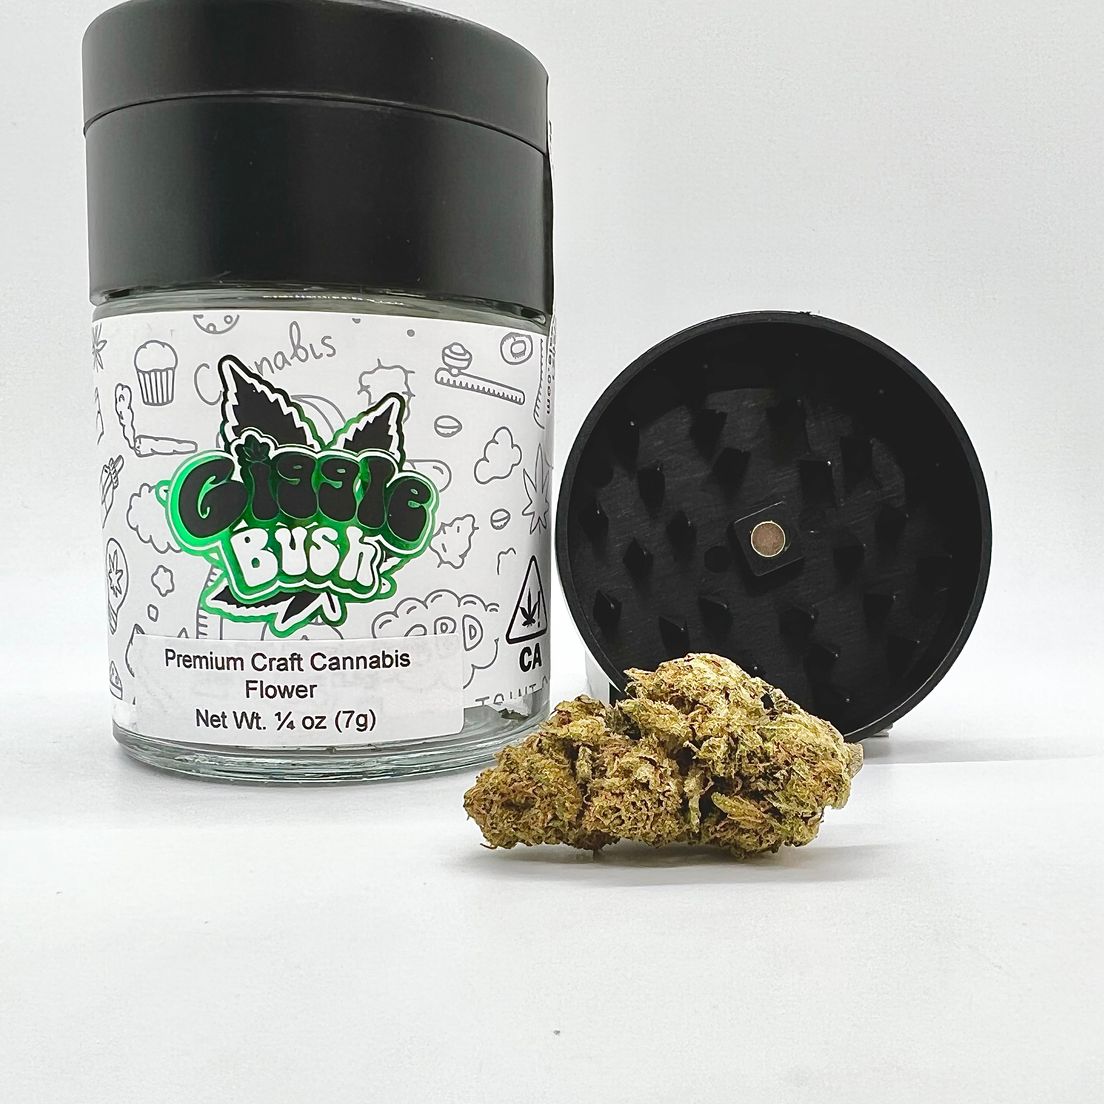 *BLOWOUT DEAL! $39 1/4 oz. Strawberry Cheesecake (Indoor/23.95%/Indica) - Giggle Bush + Built-in Grinder